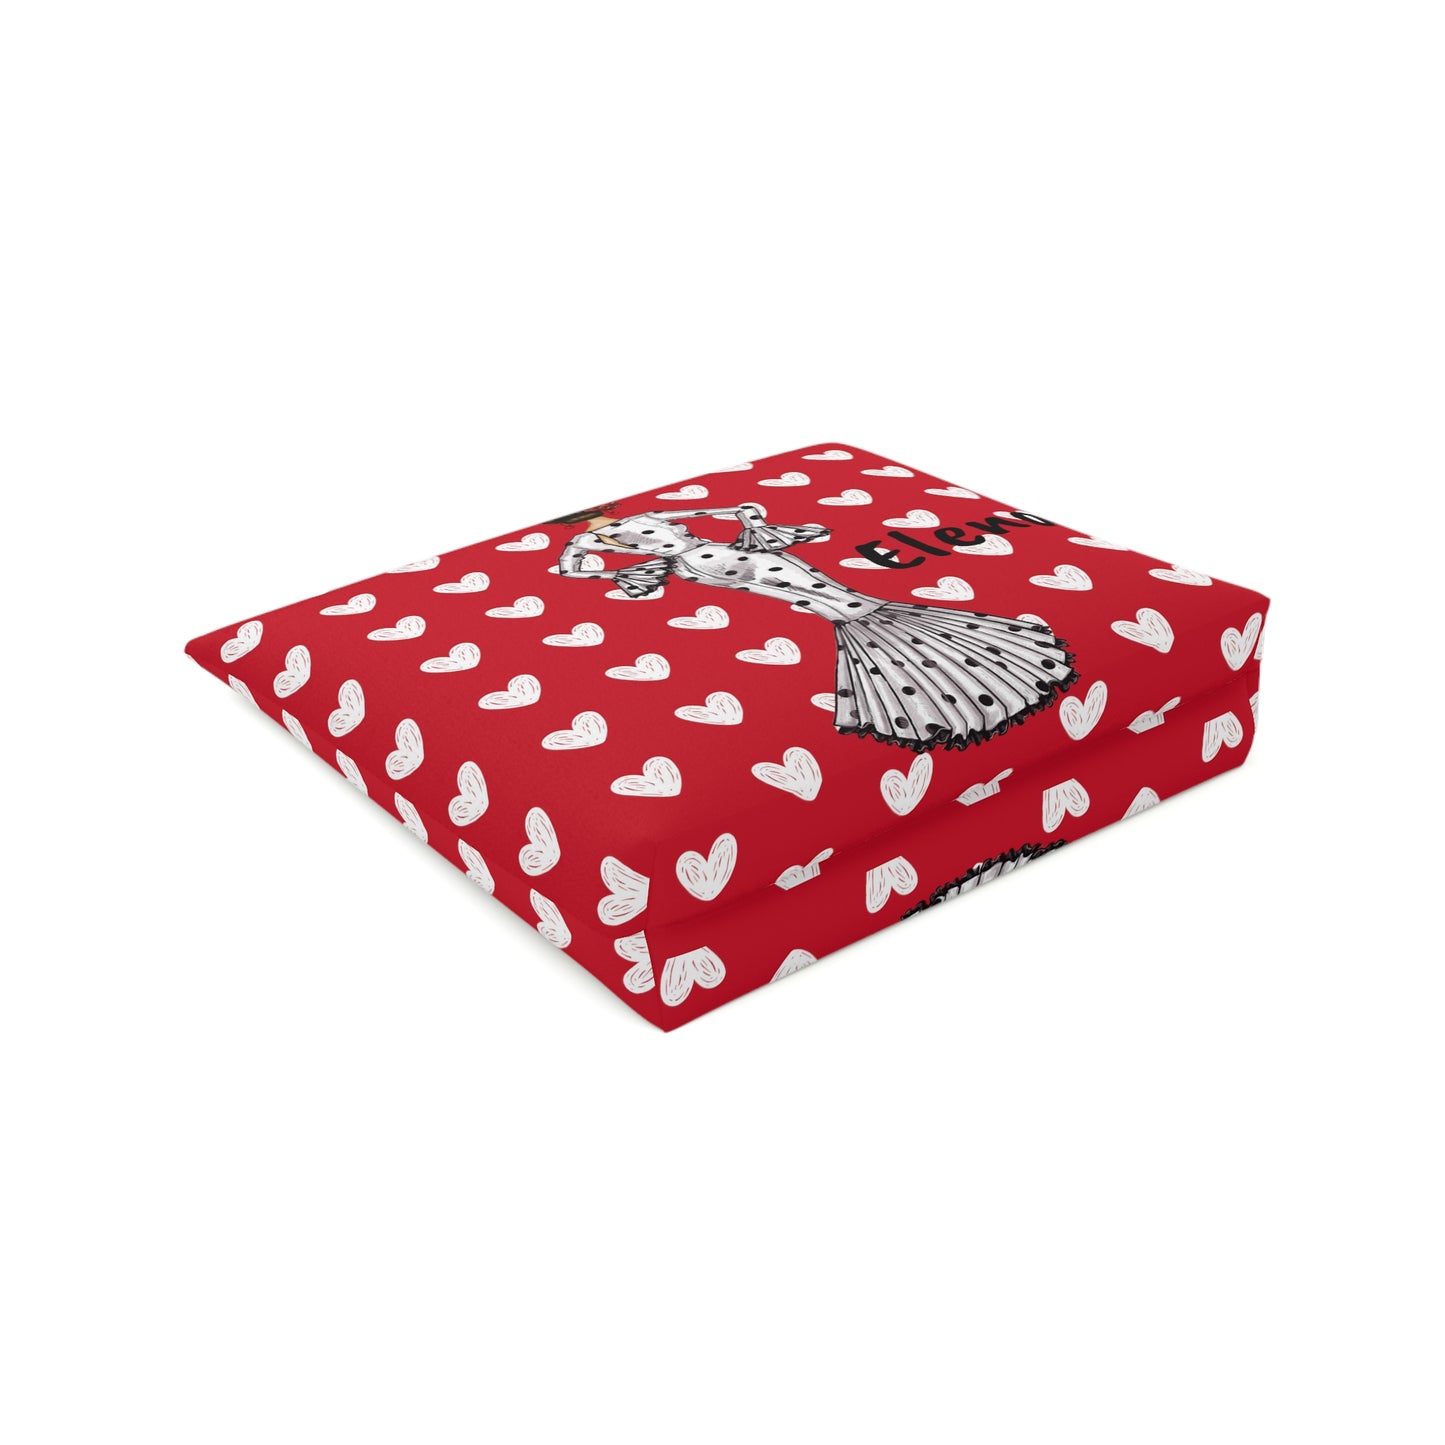 a red and white box with hearts on it